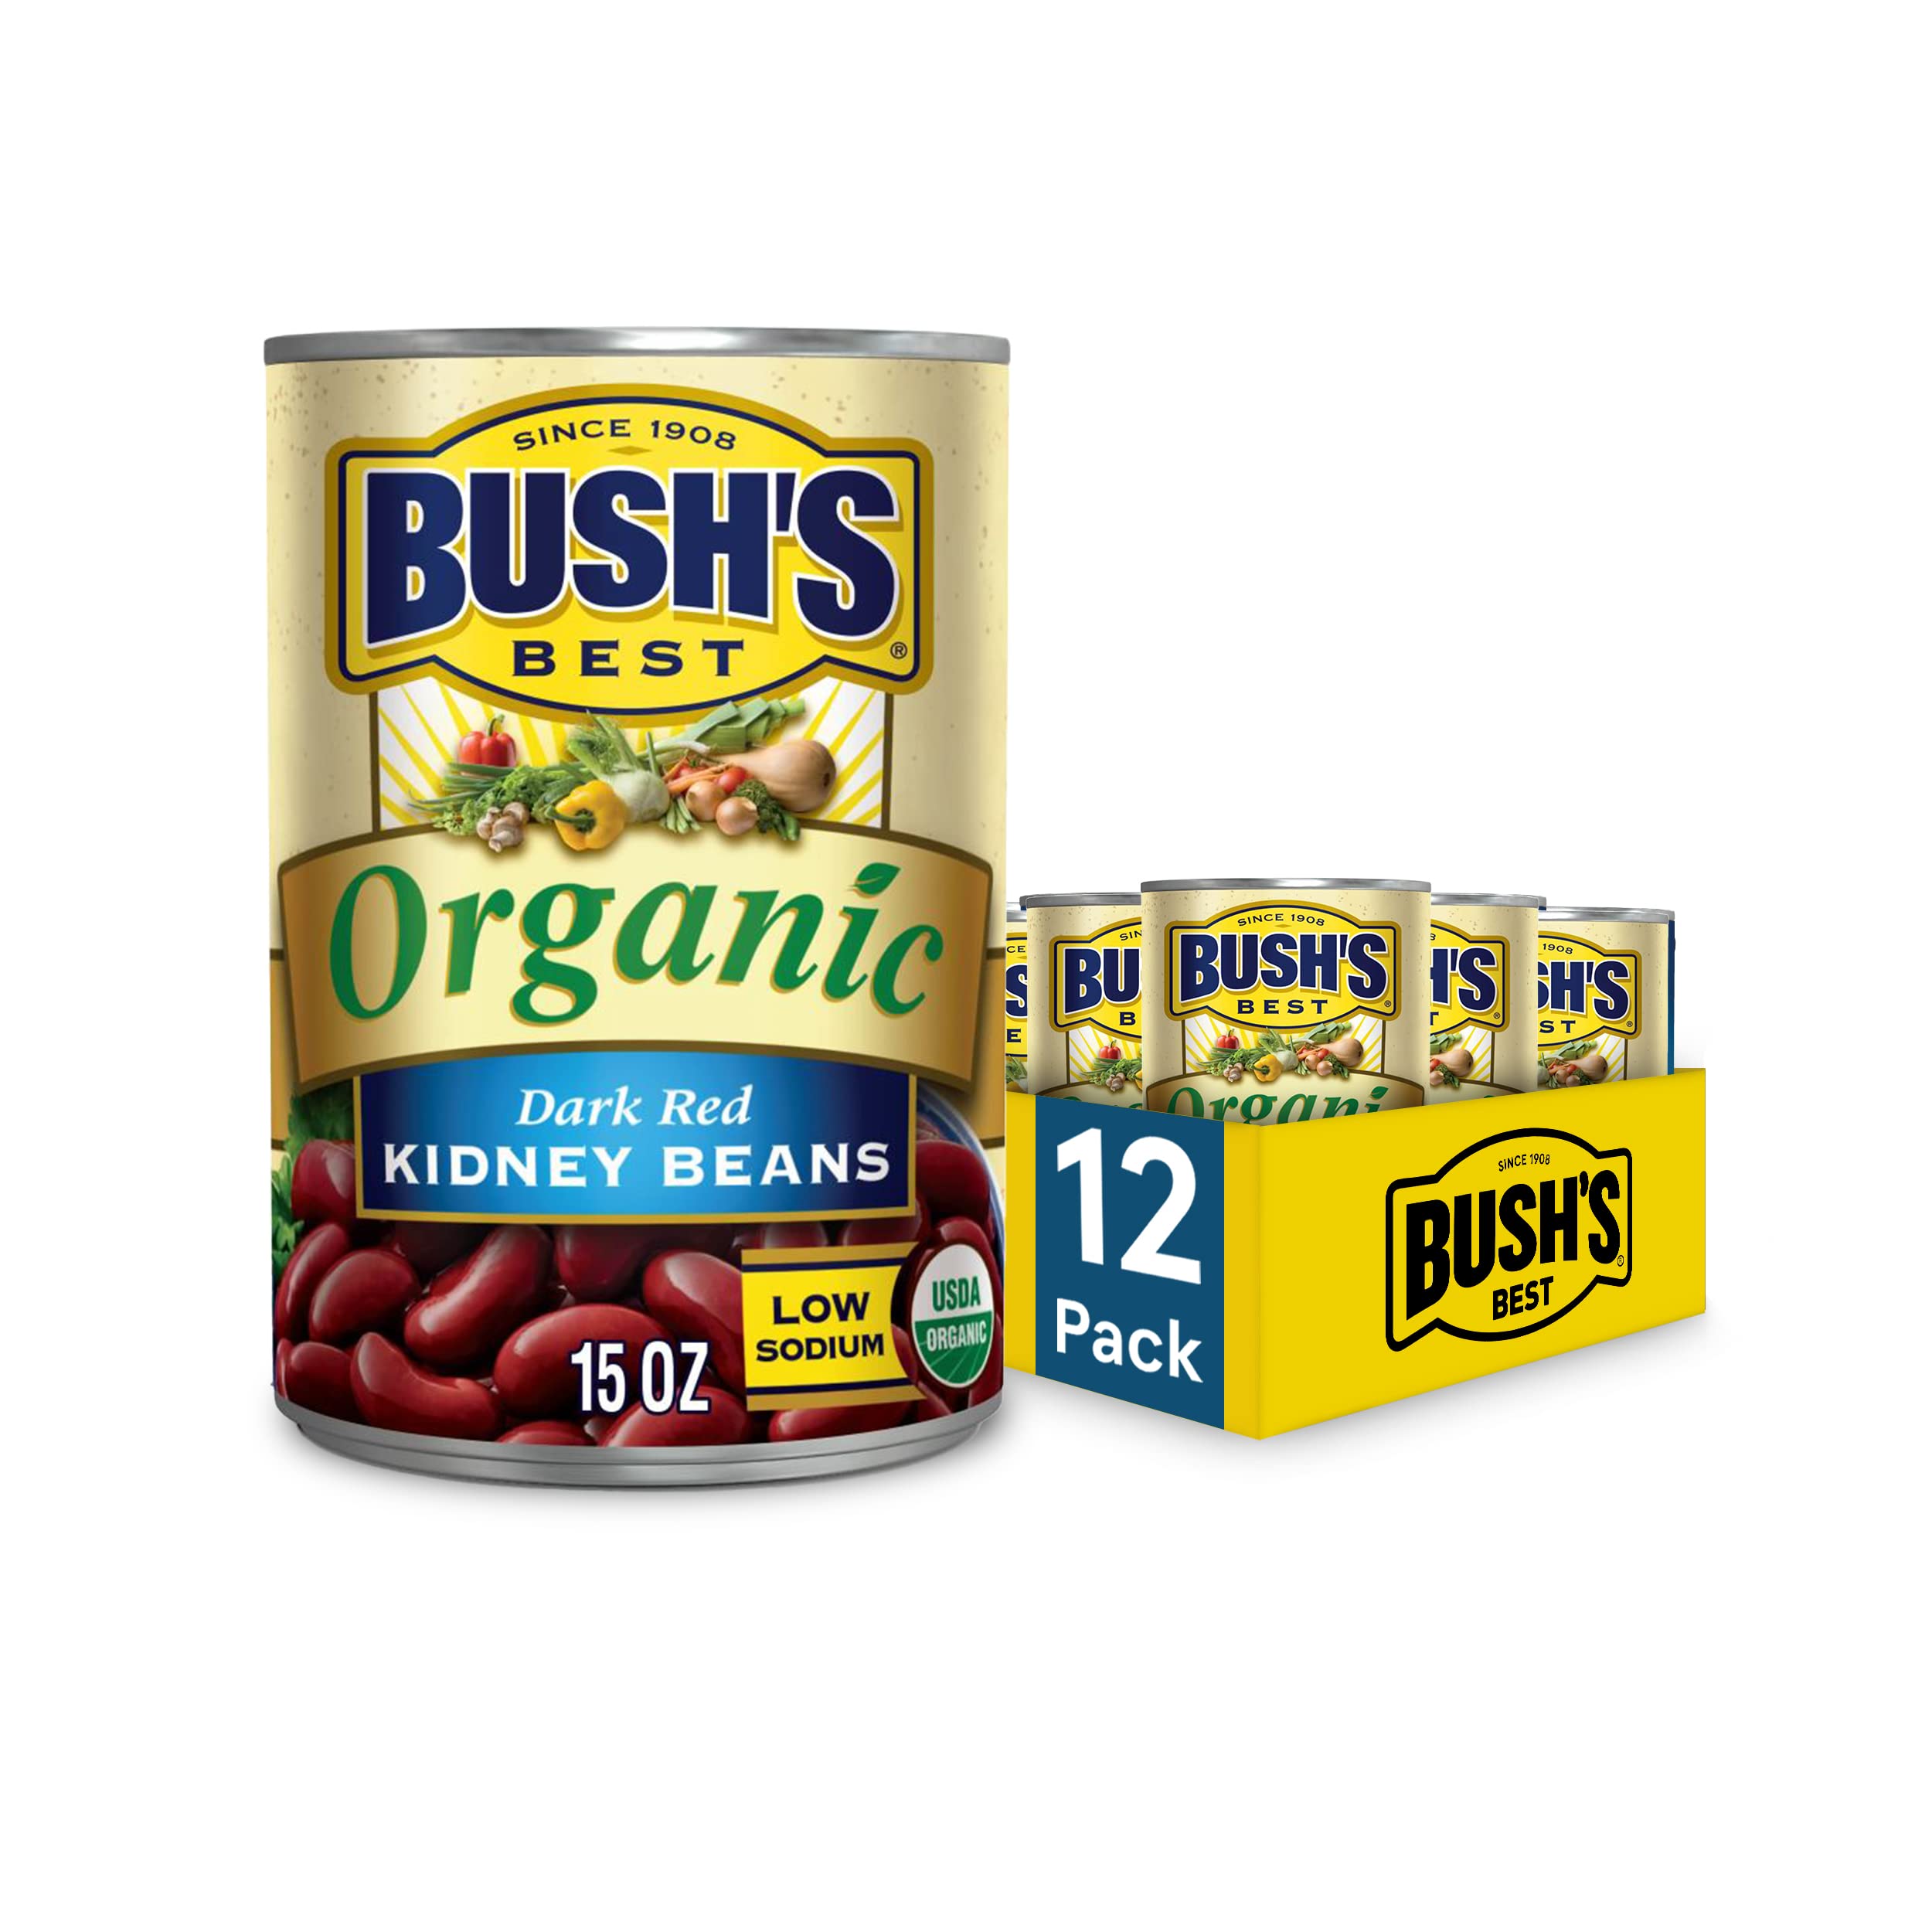 12-Pack 15-Oz Bush's Best Dark Red Kidney Bean Cans (USDA Organic) $14.60 ($1.22 Each) w/ S&S + Free Shipping w/ Prime or on $25+